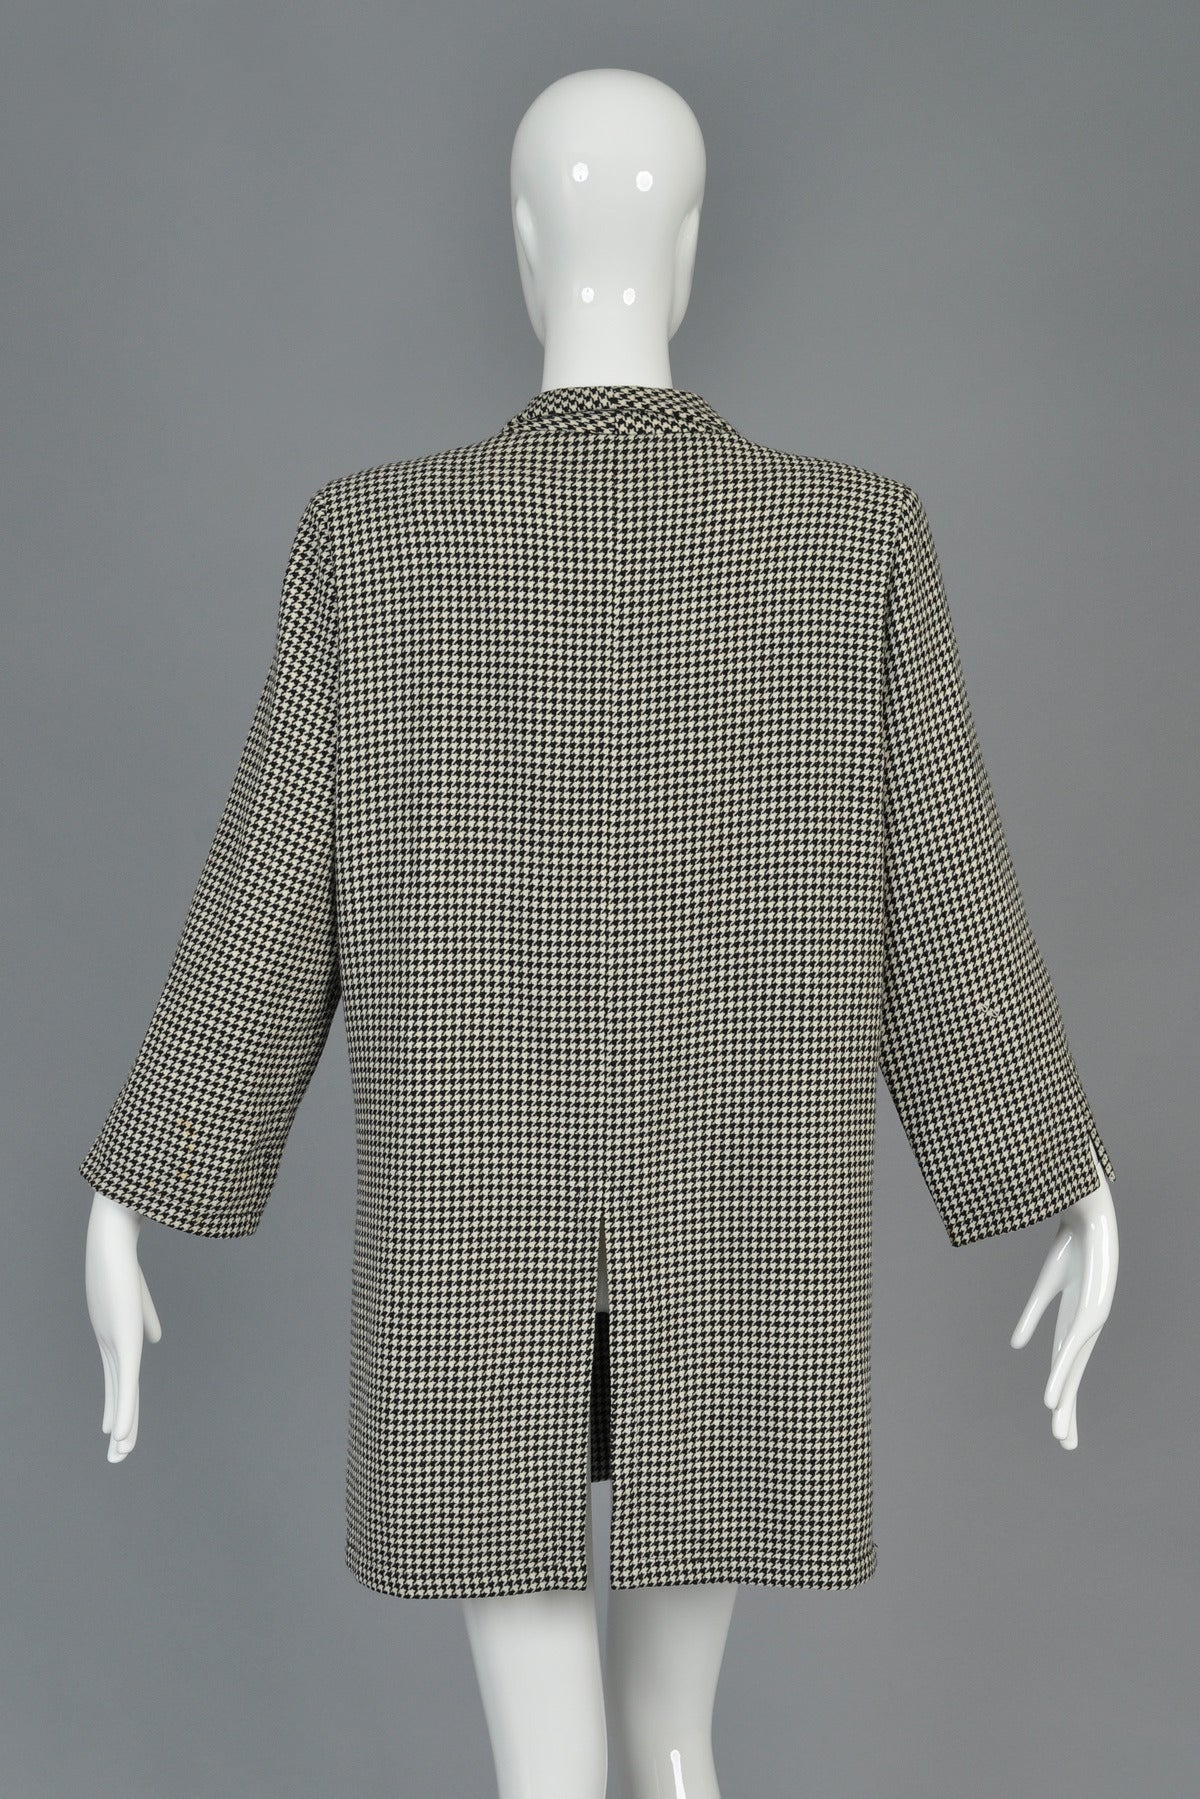 F/W 93 Pierre Cardin Haute Couture Houndstooth Vinyl Tie Jacket For ...